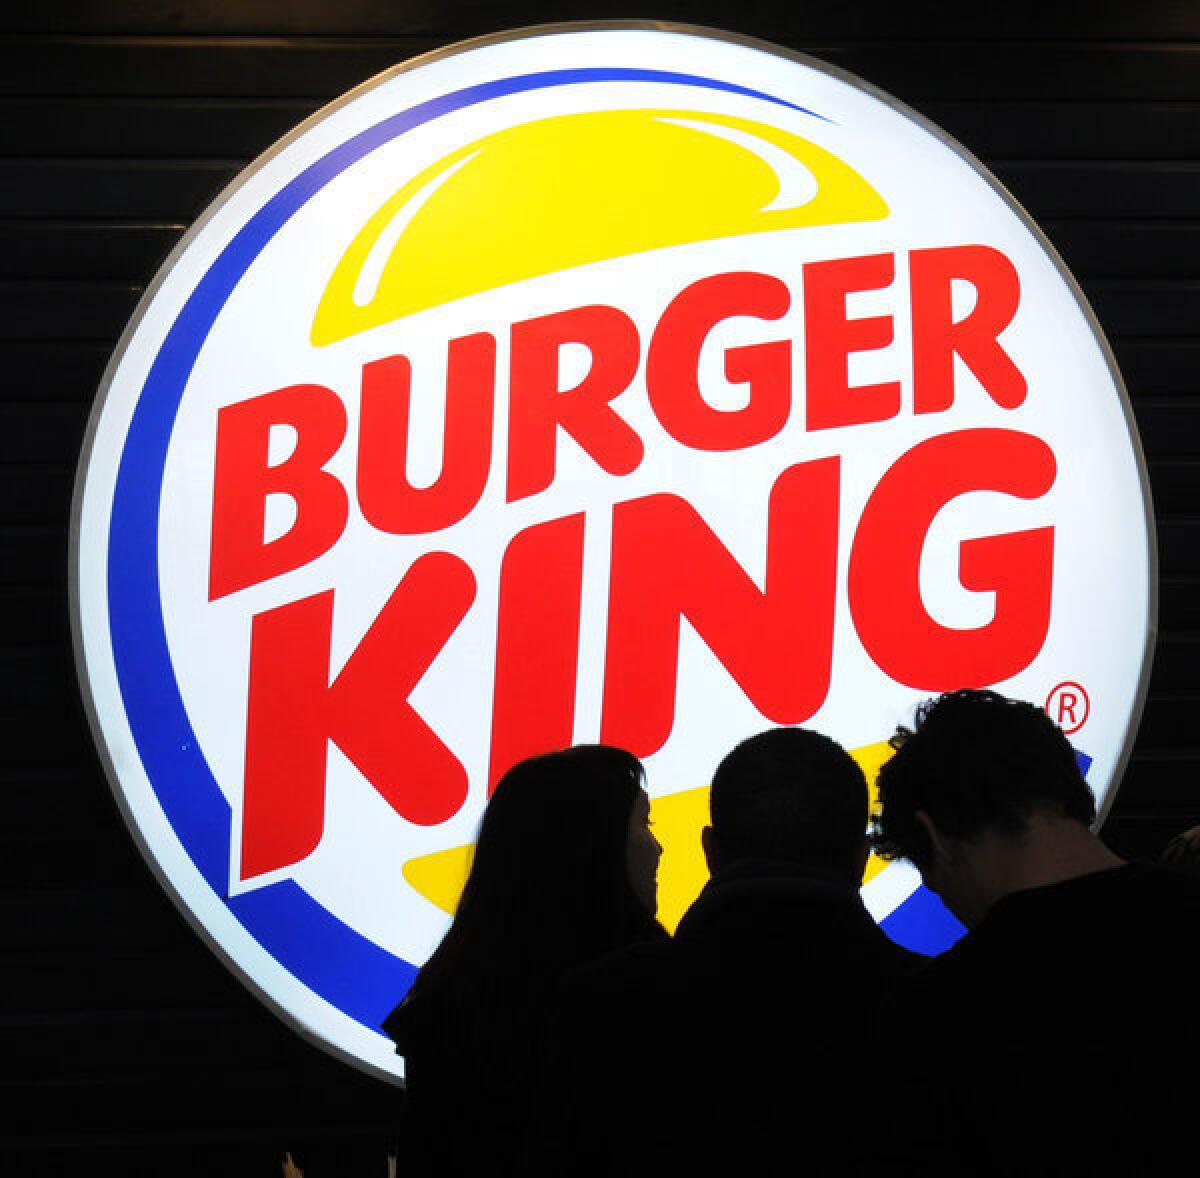 Carrols Restaurant Group, Burger King's largest franchisee, has settled a sexual harassment lawsuit involving 89 women who are current or former employees.